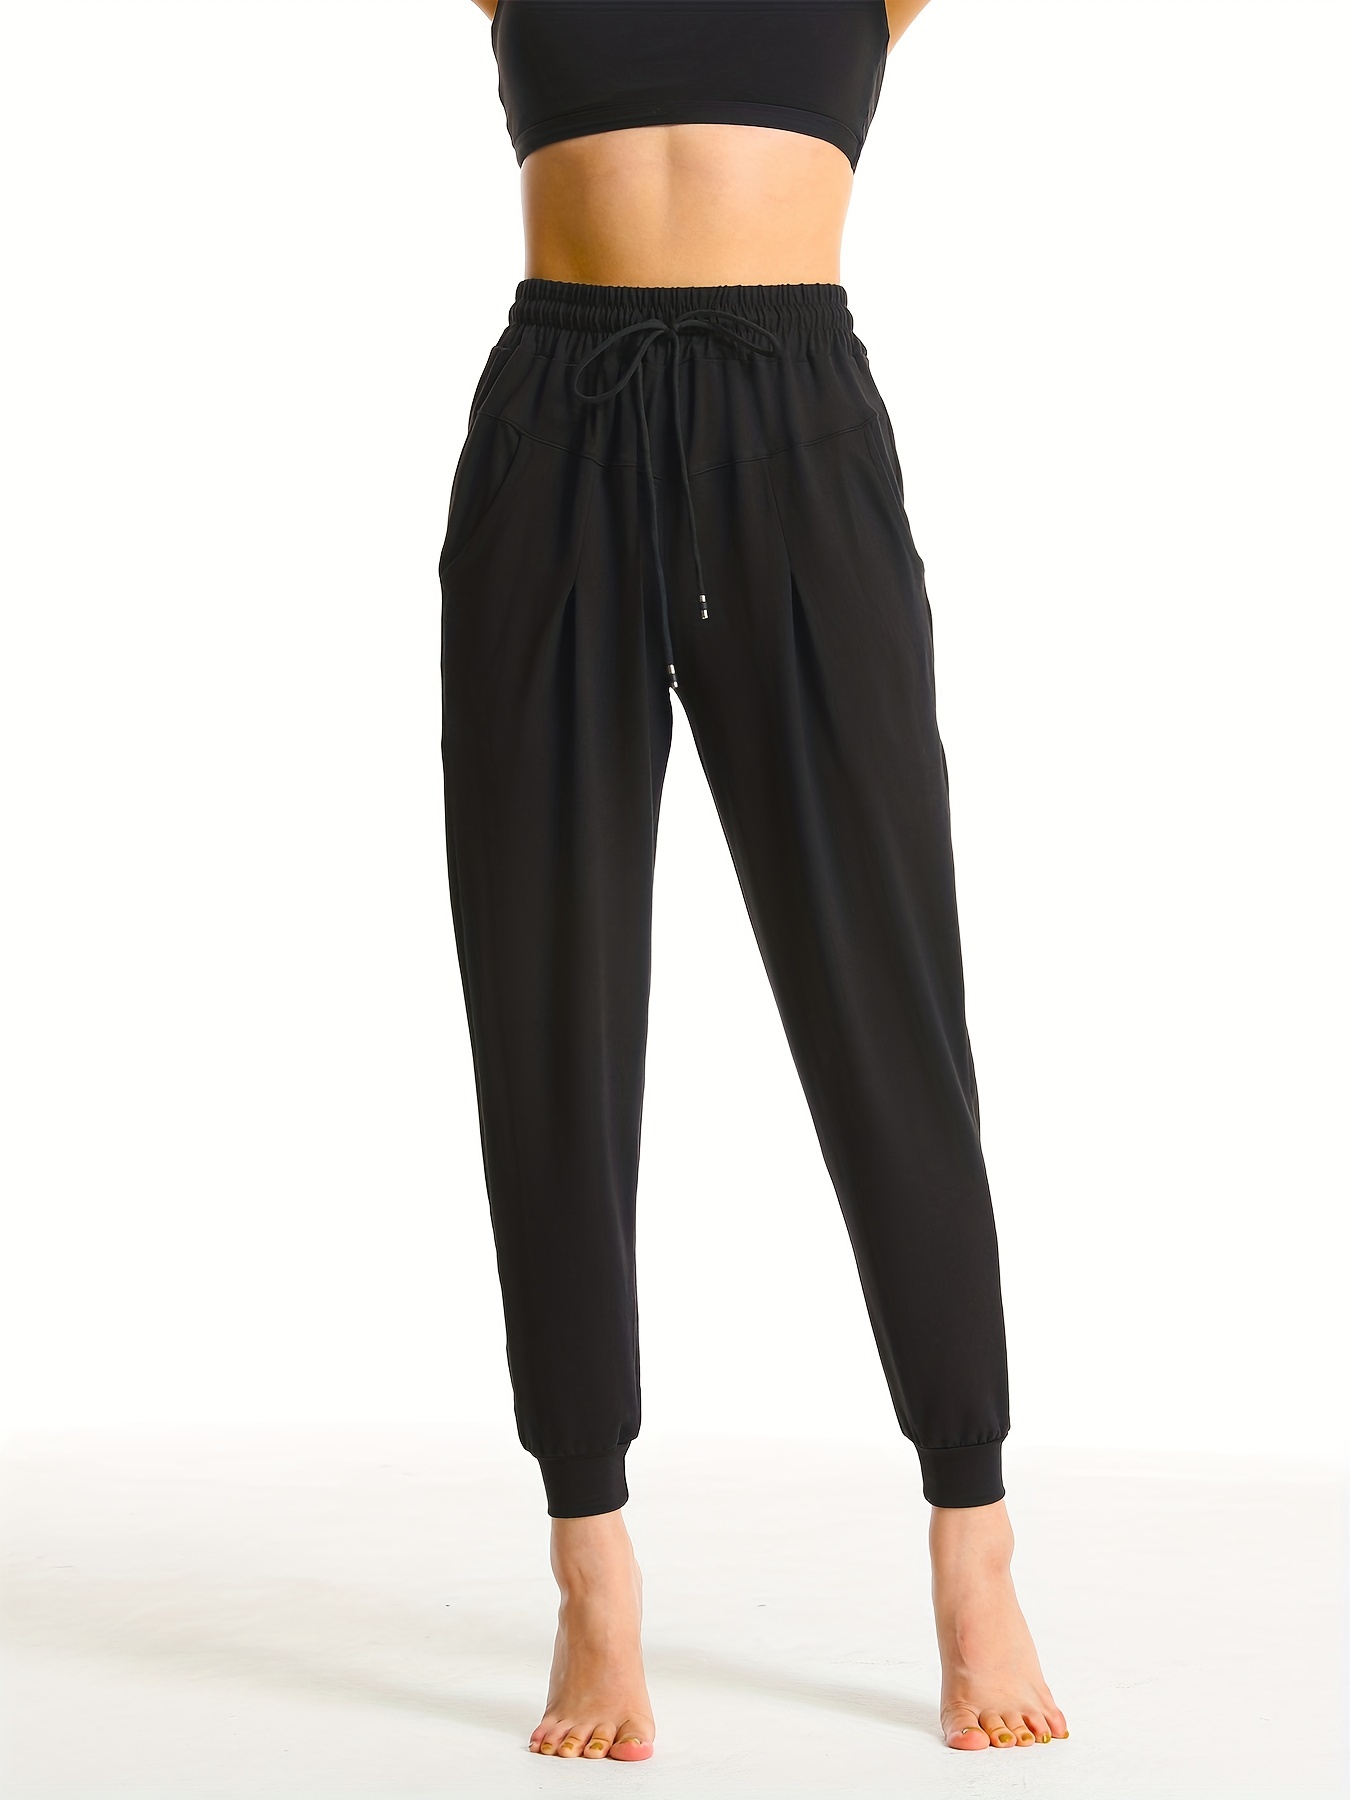 Lu 159 Womens Yoga Sports Joggers Loose Fit Drawstring Elastic Waist Gym  Trousers For Ladies For Running, Fitness, And Casual Wear Workout Pant  Trousers From Cdwe342, $23.96